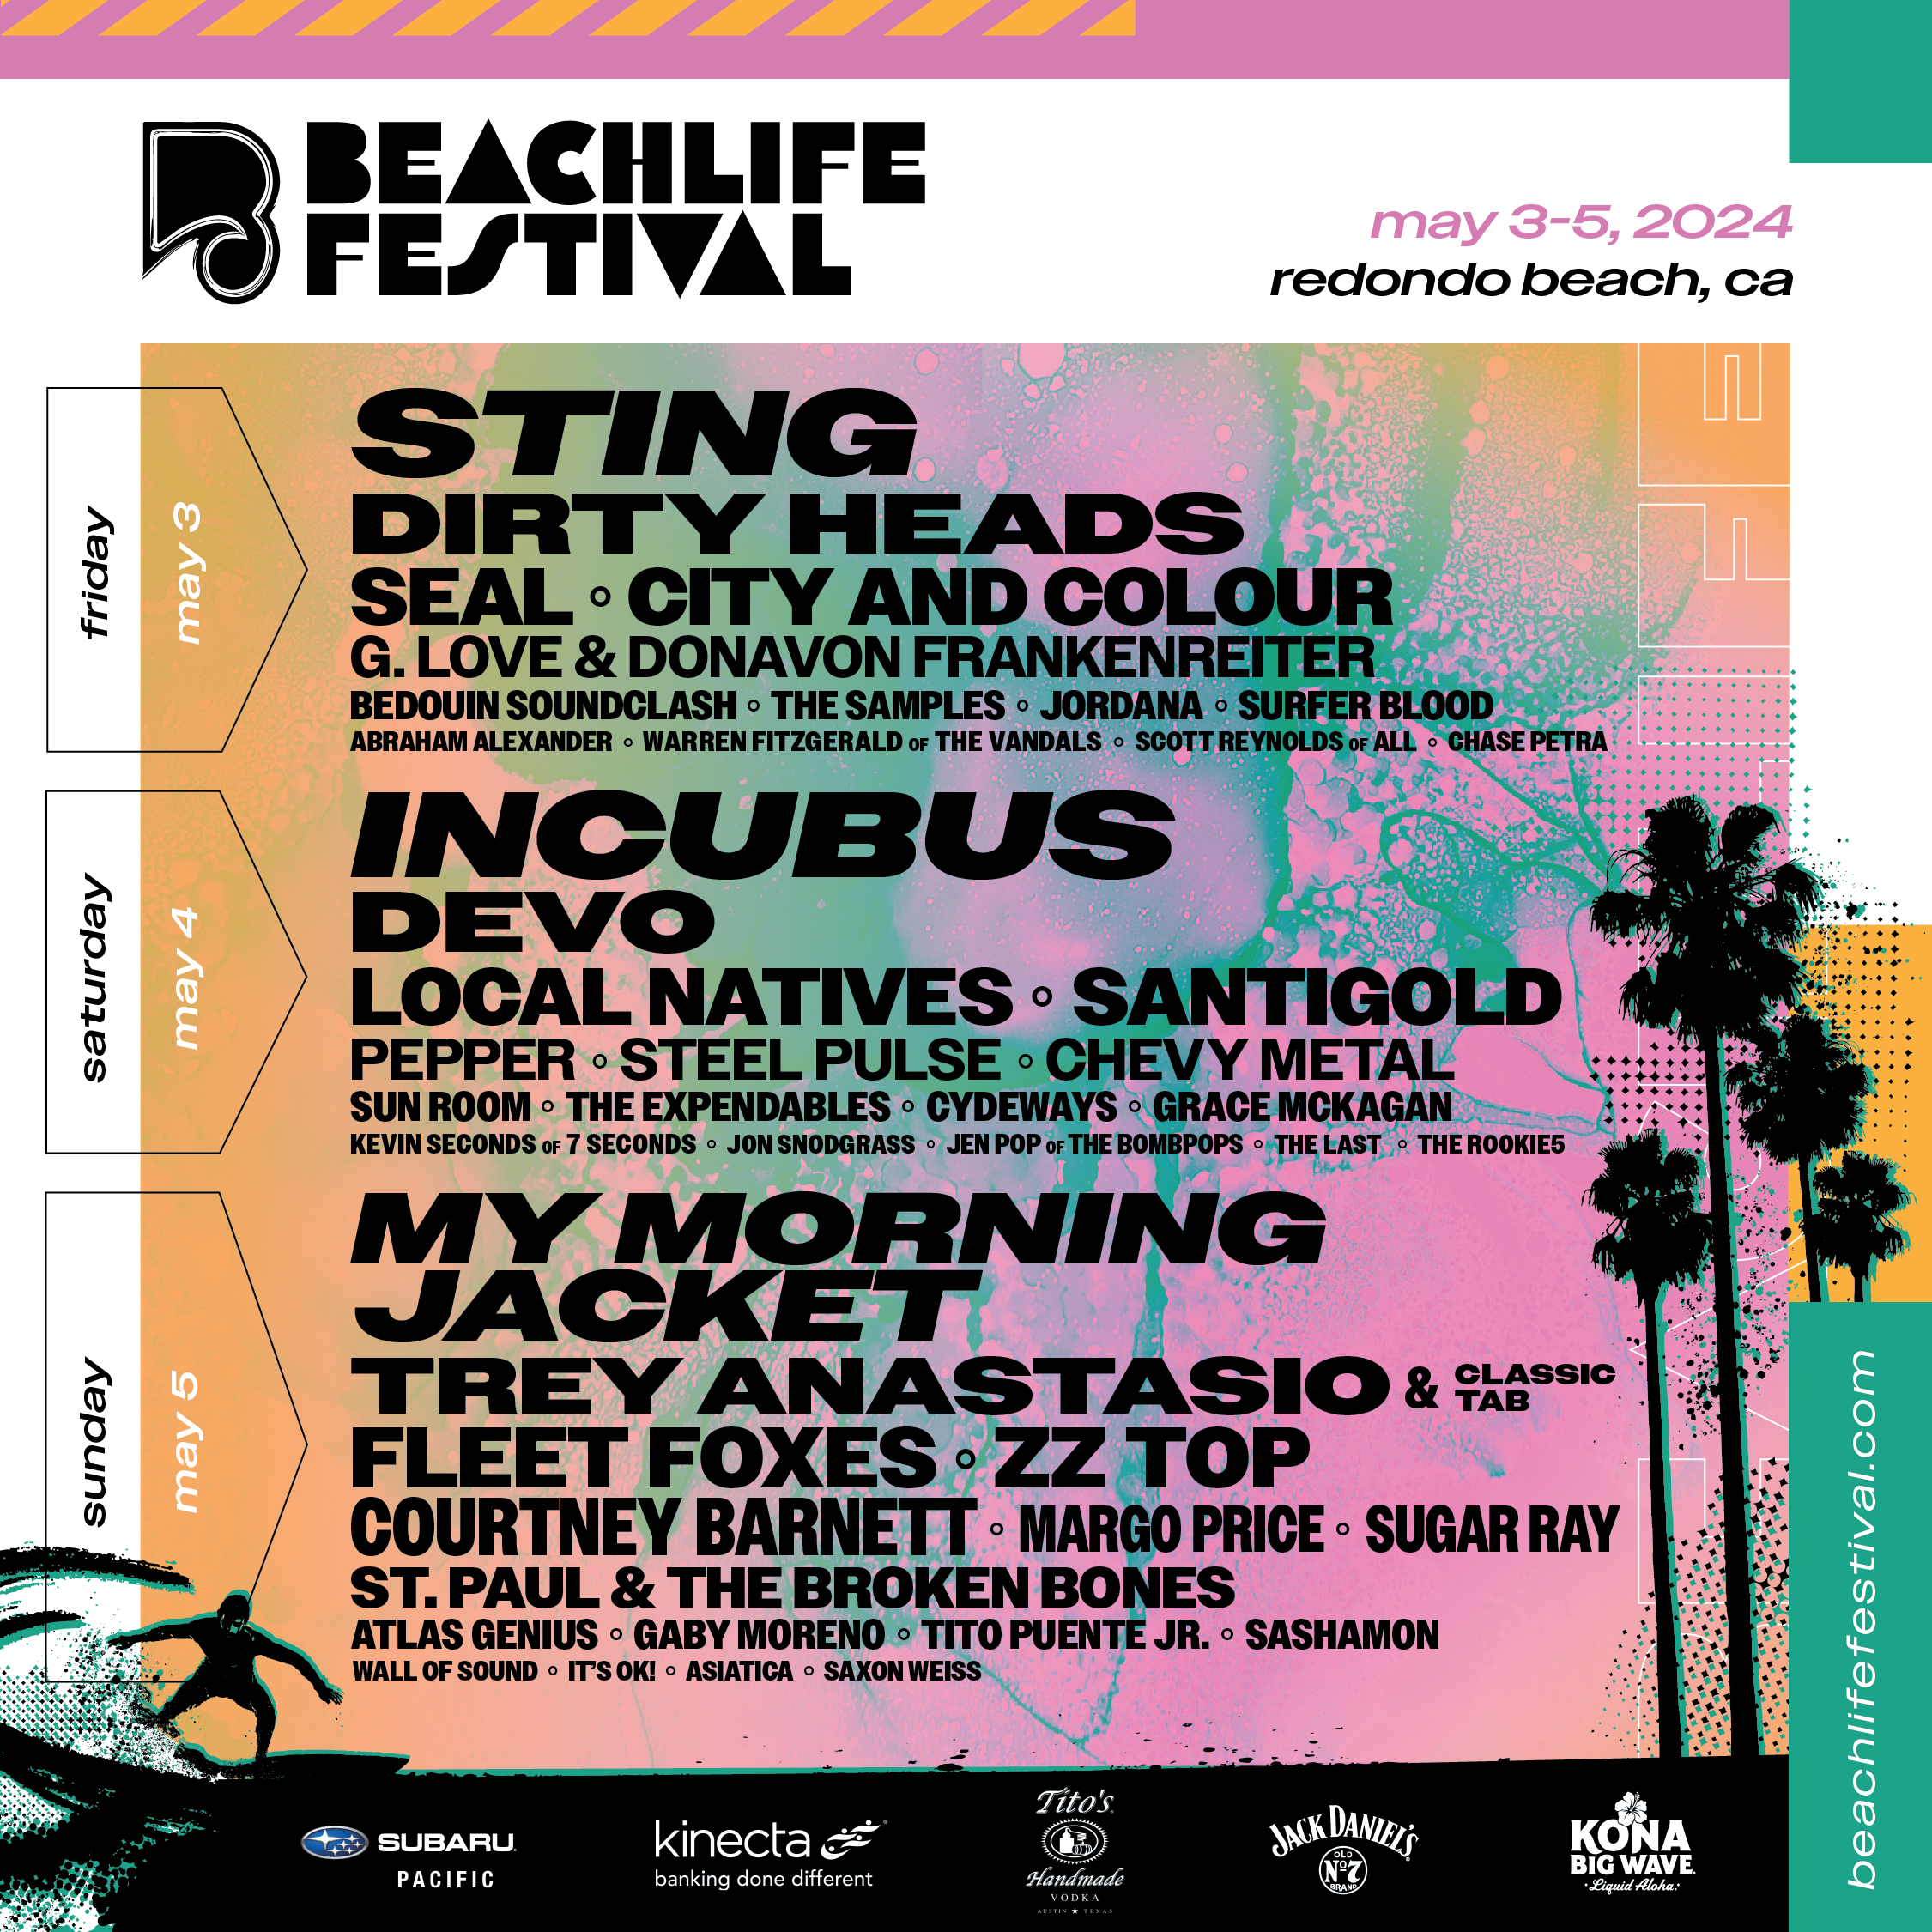 BEACHLIFE FESTIVAL 2024 ANNOUNCES LINEUP WITH STING, INCUBUS, MY MORNING JACKET, DEVO, DIRTY HEADS